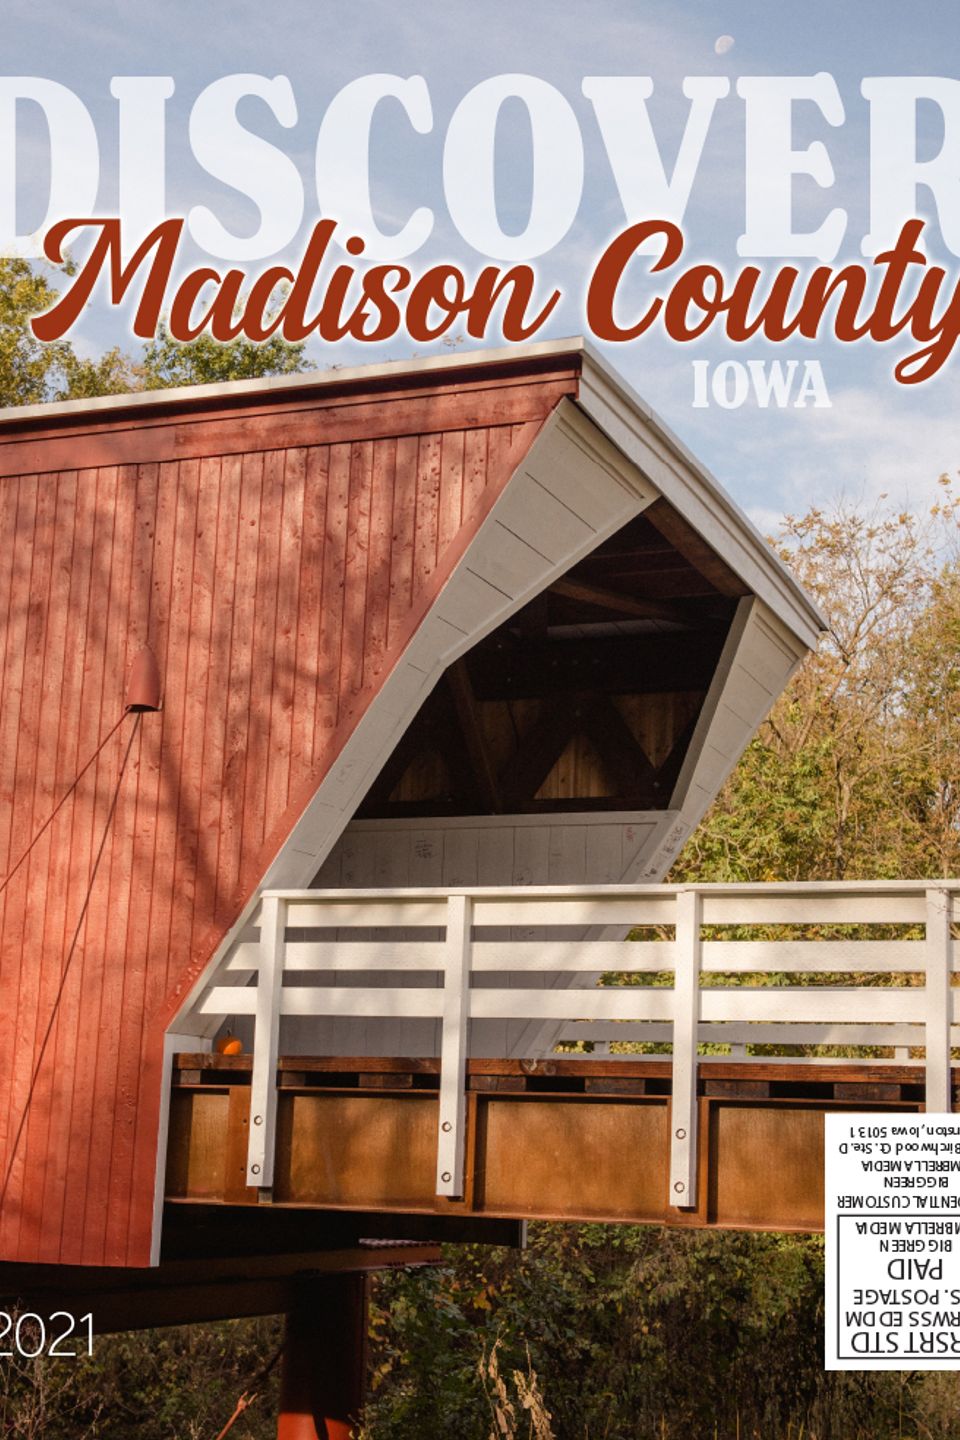 Discover madison co gd 2021 1